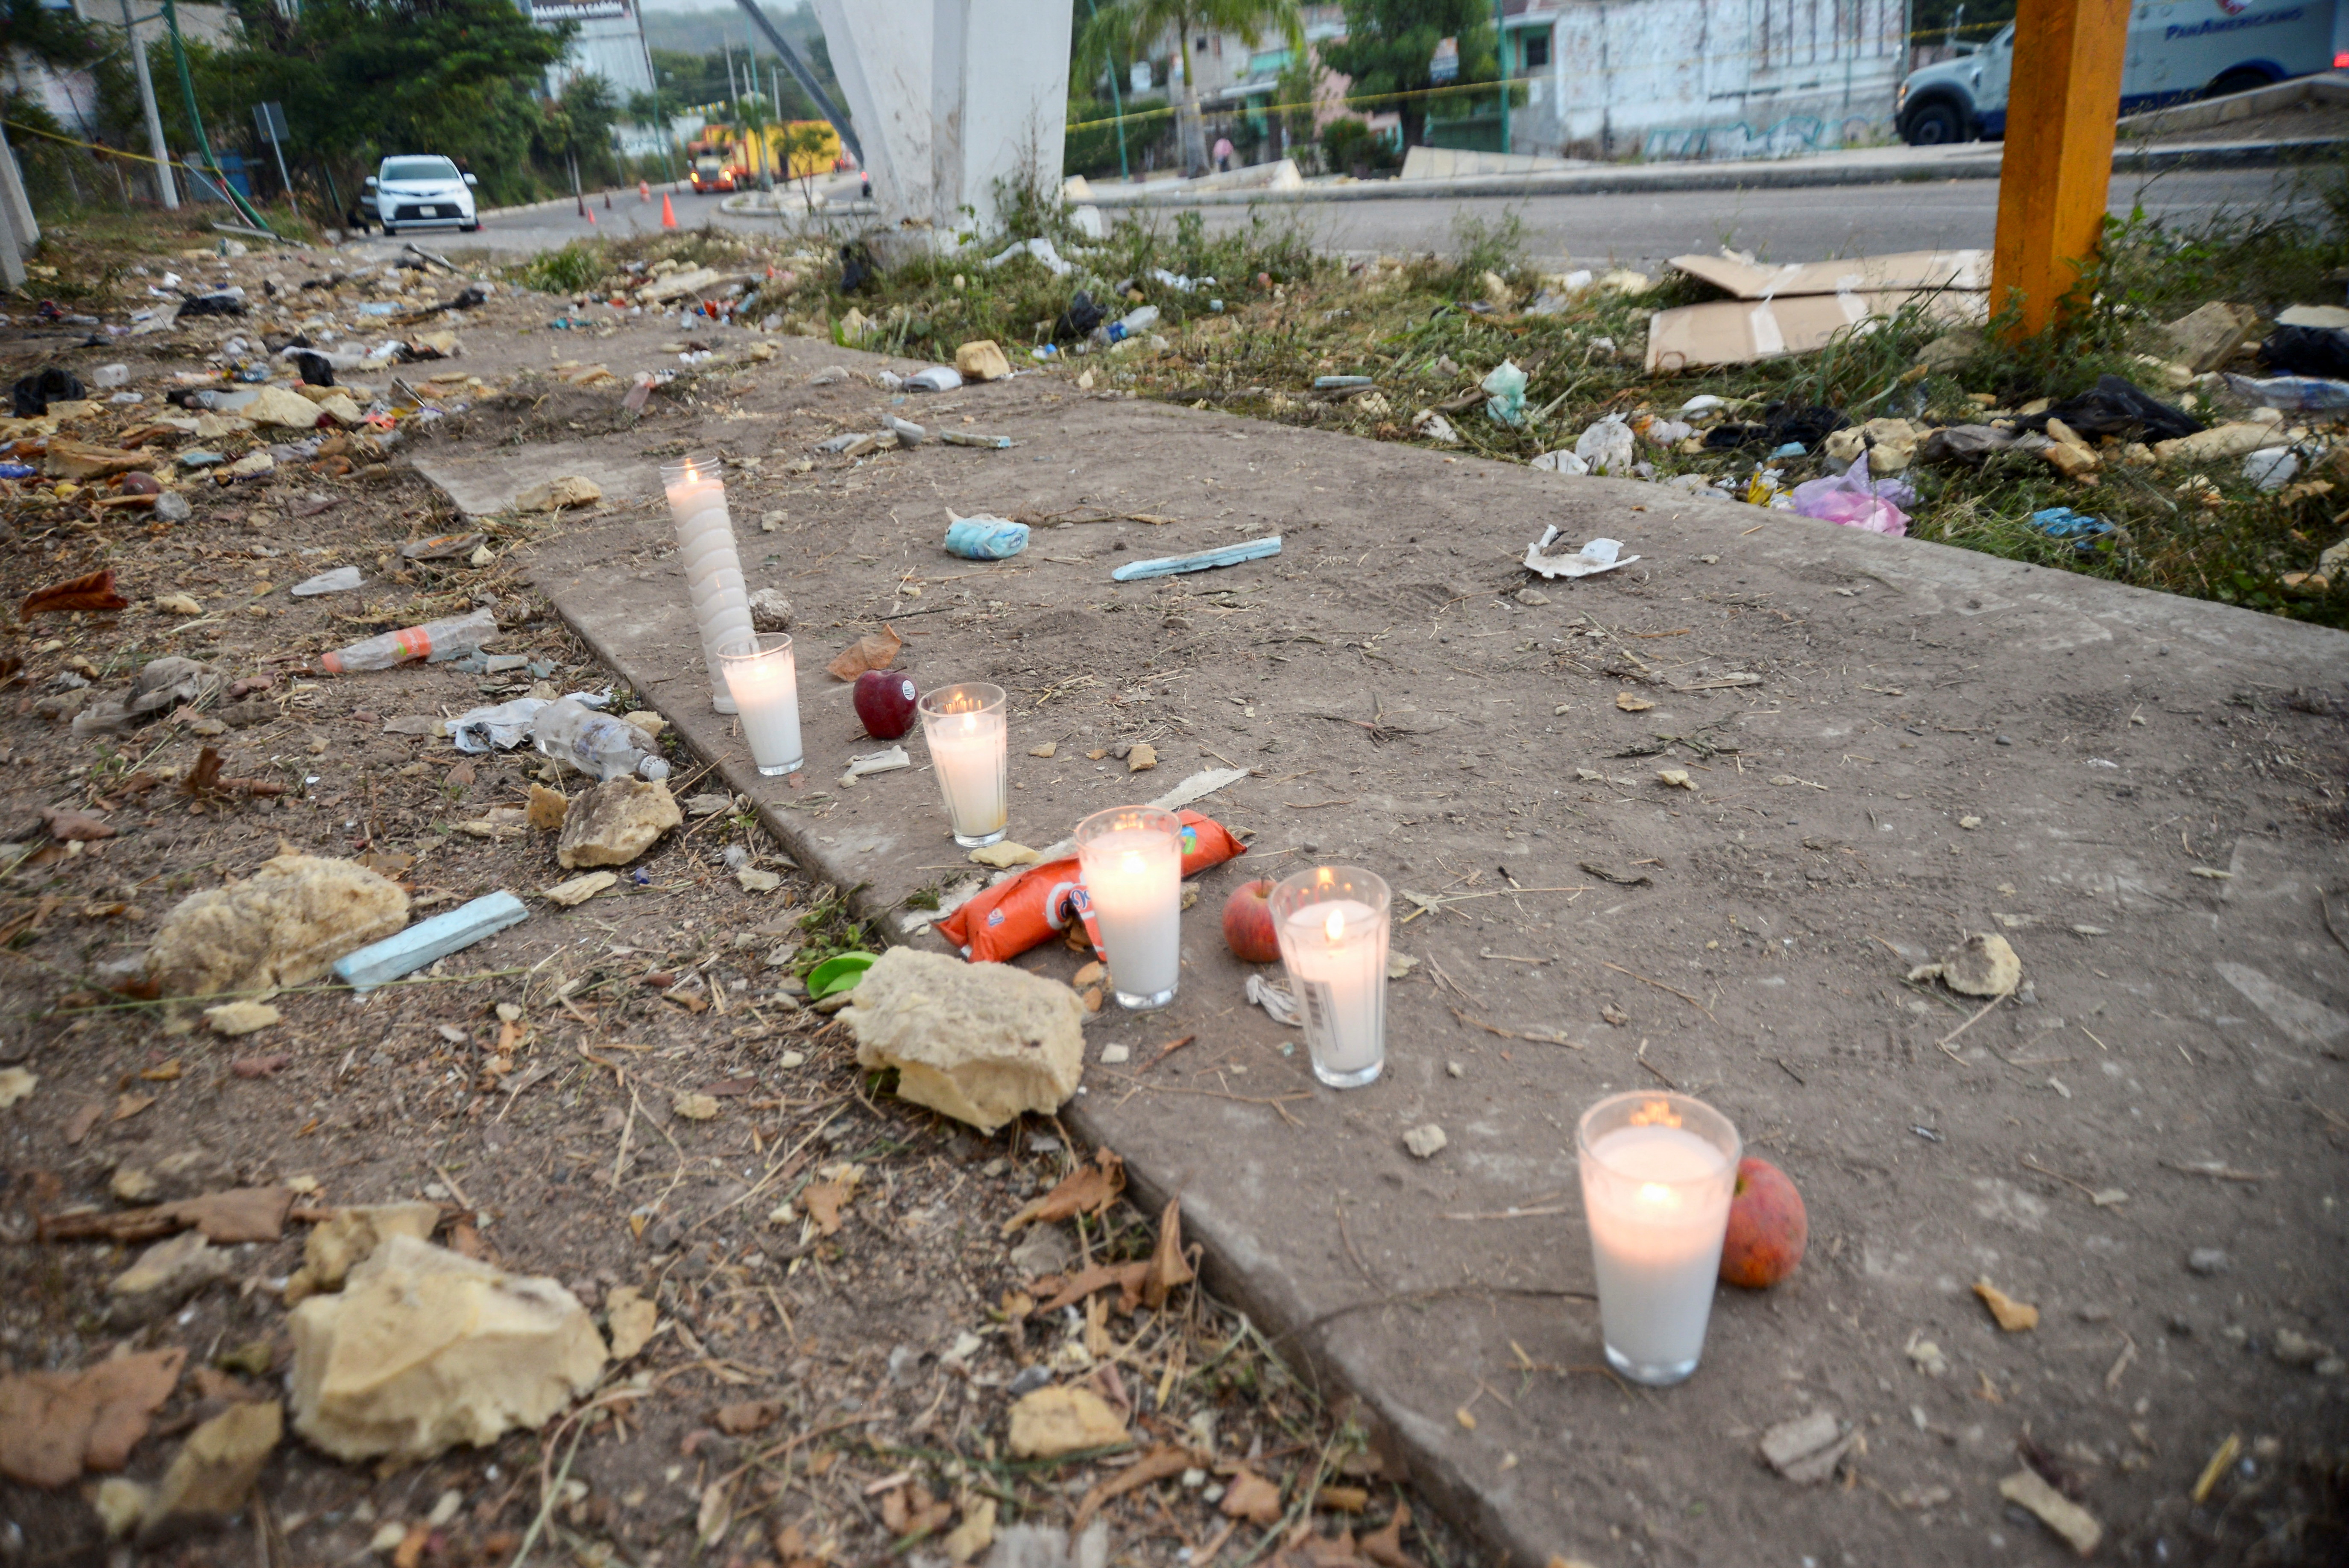 Votive candles are pictured at the site of a truck accident in Tuxtla Gutierrez